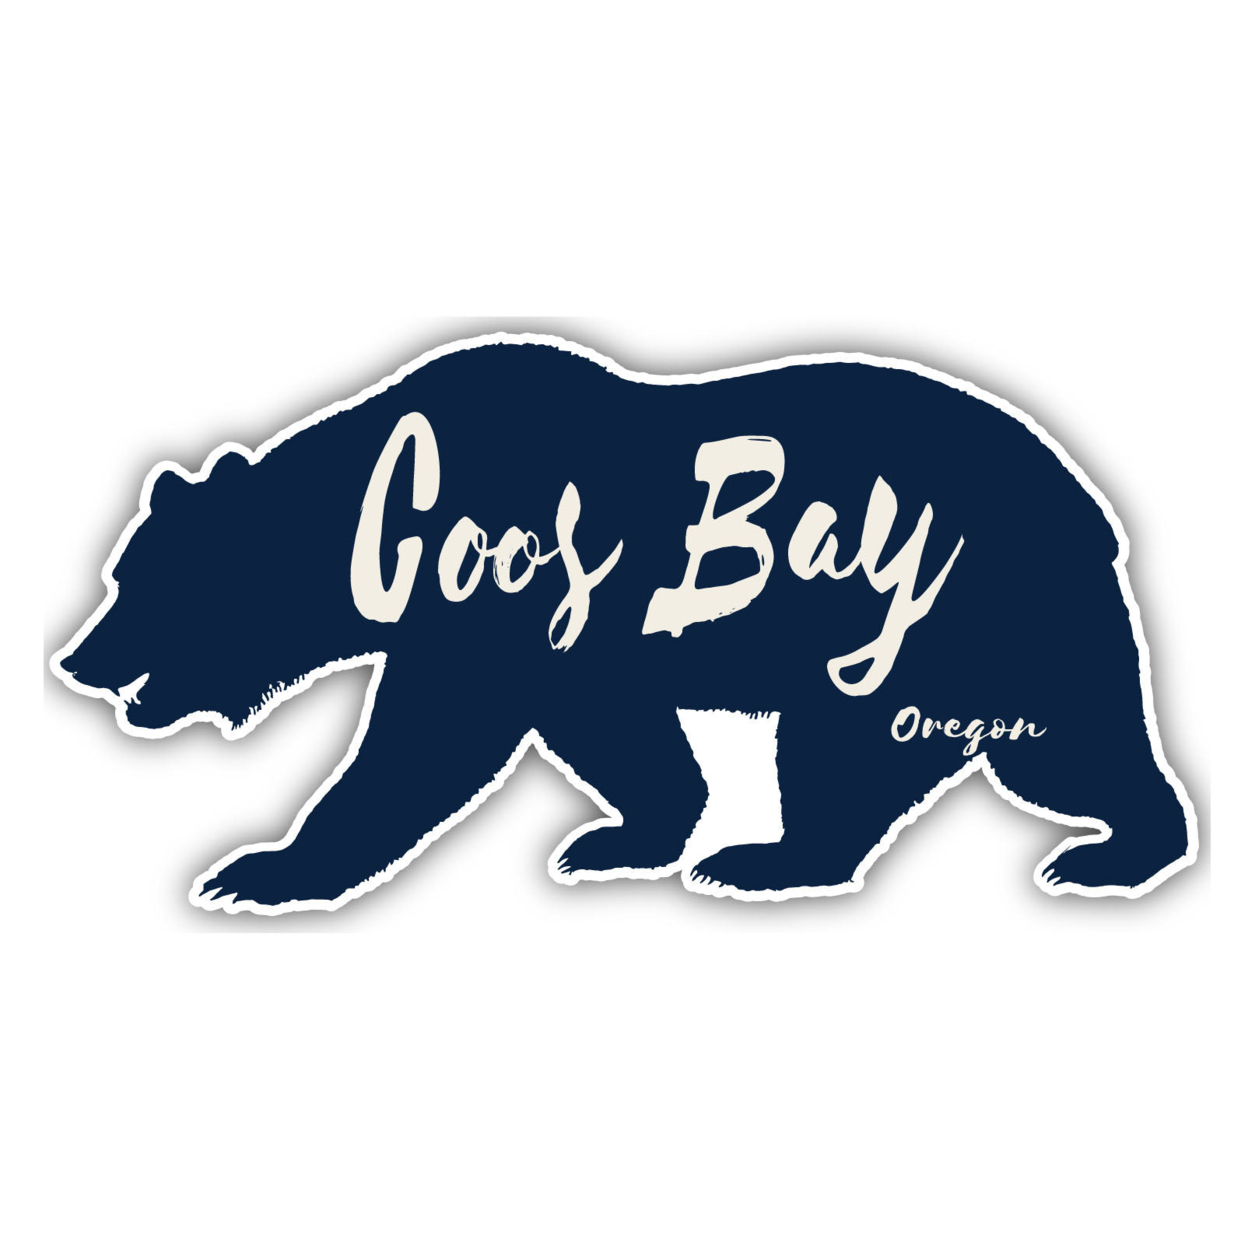 Coos Bay Oregon Souvenir Decorative Stickers (Choose Theme And Size) - 4-Pack, 8-Inch, Adventures Awaits